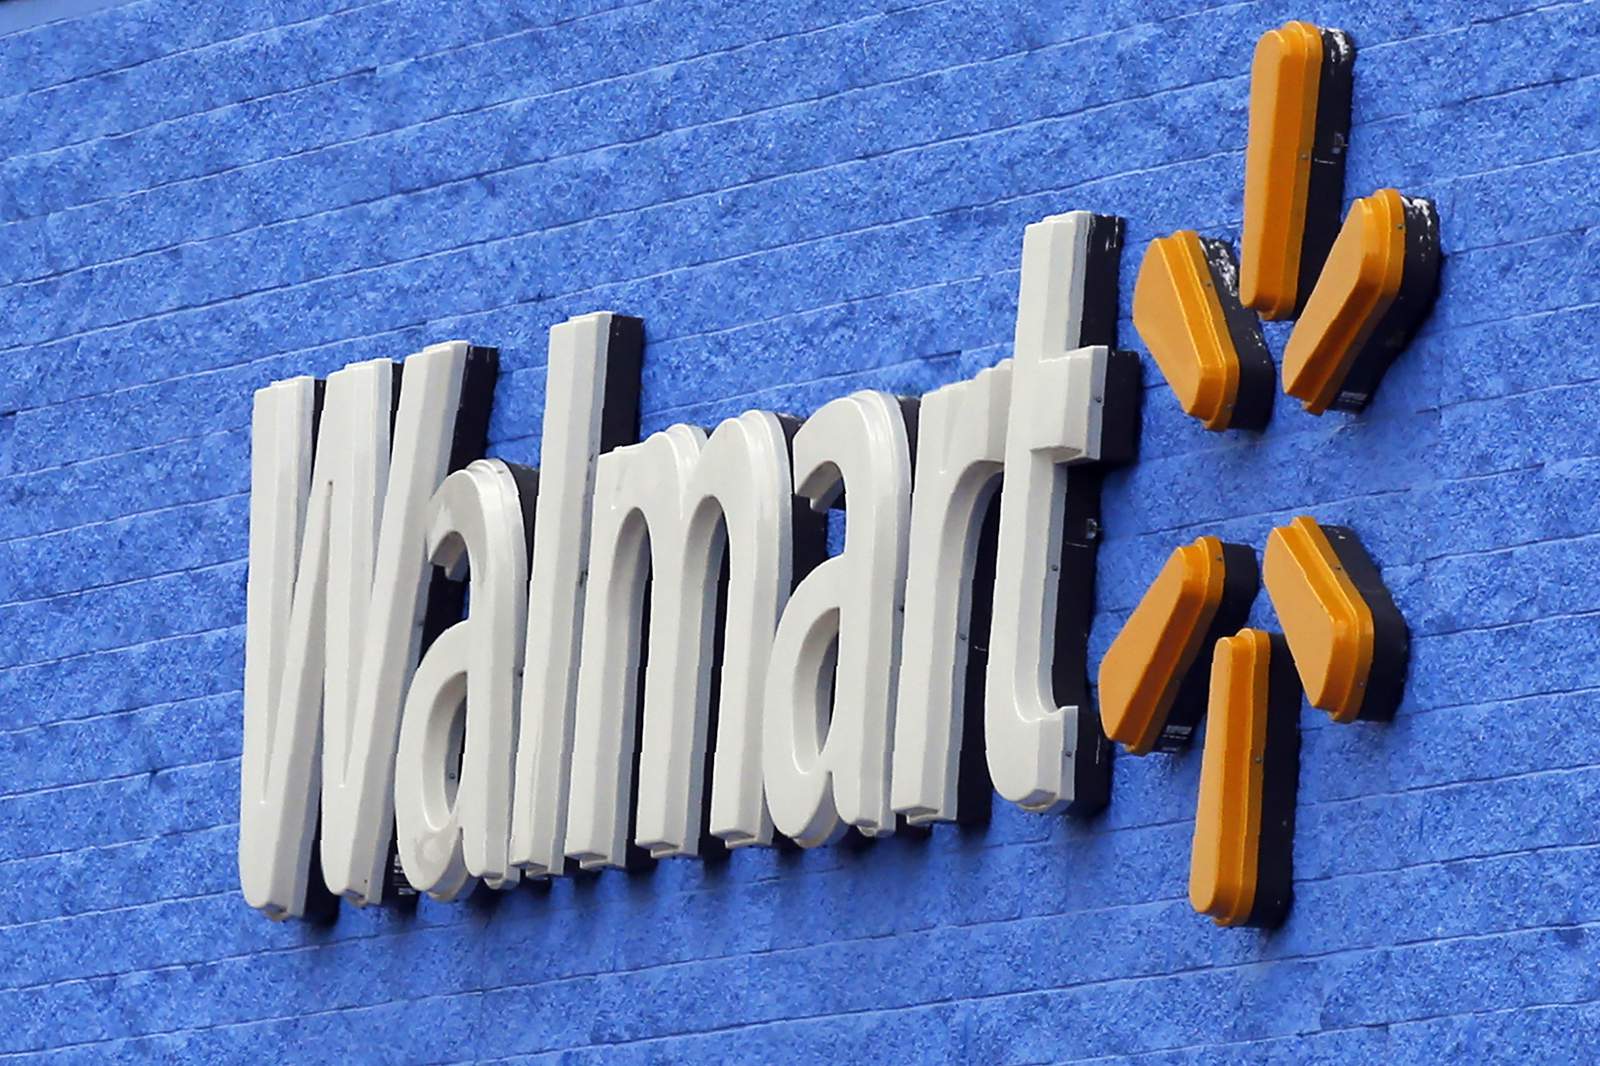 Walmart, Sam’s Pharmacy Club, which administers COVID-19 vaccines in Texas, including San Antonio